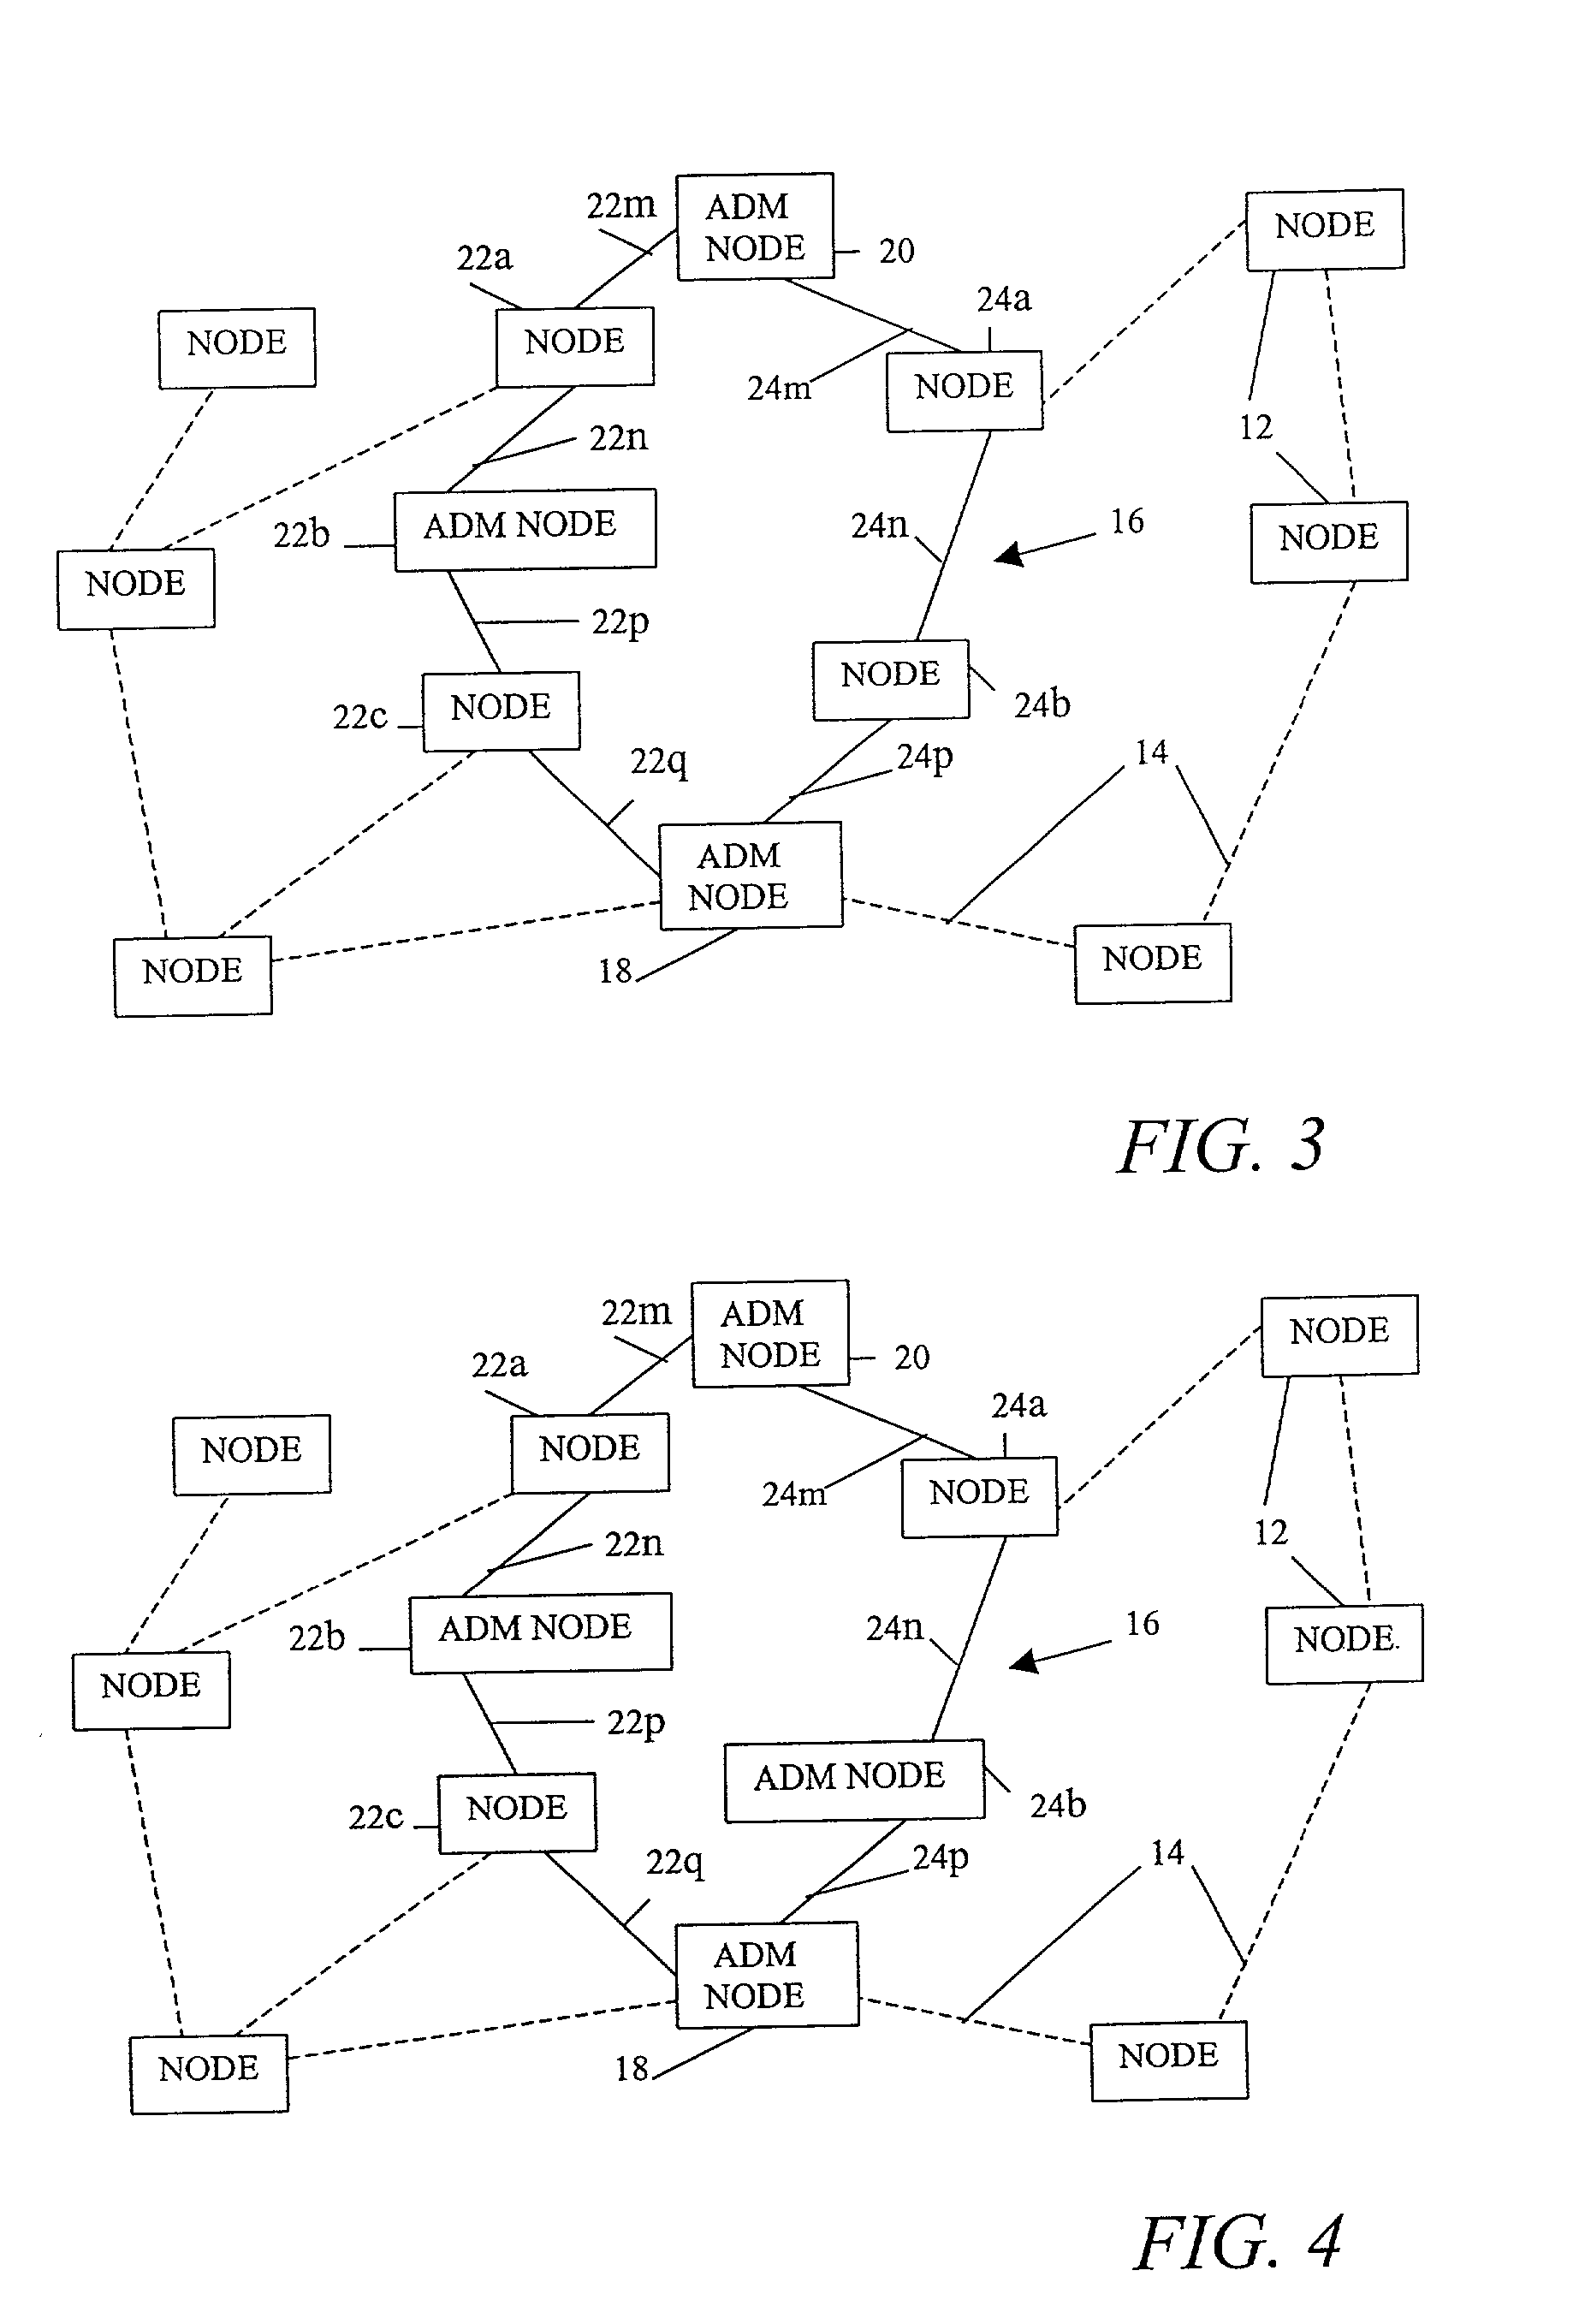 Method for designing rings in telecommunications network